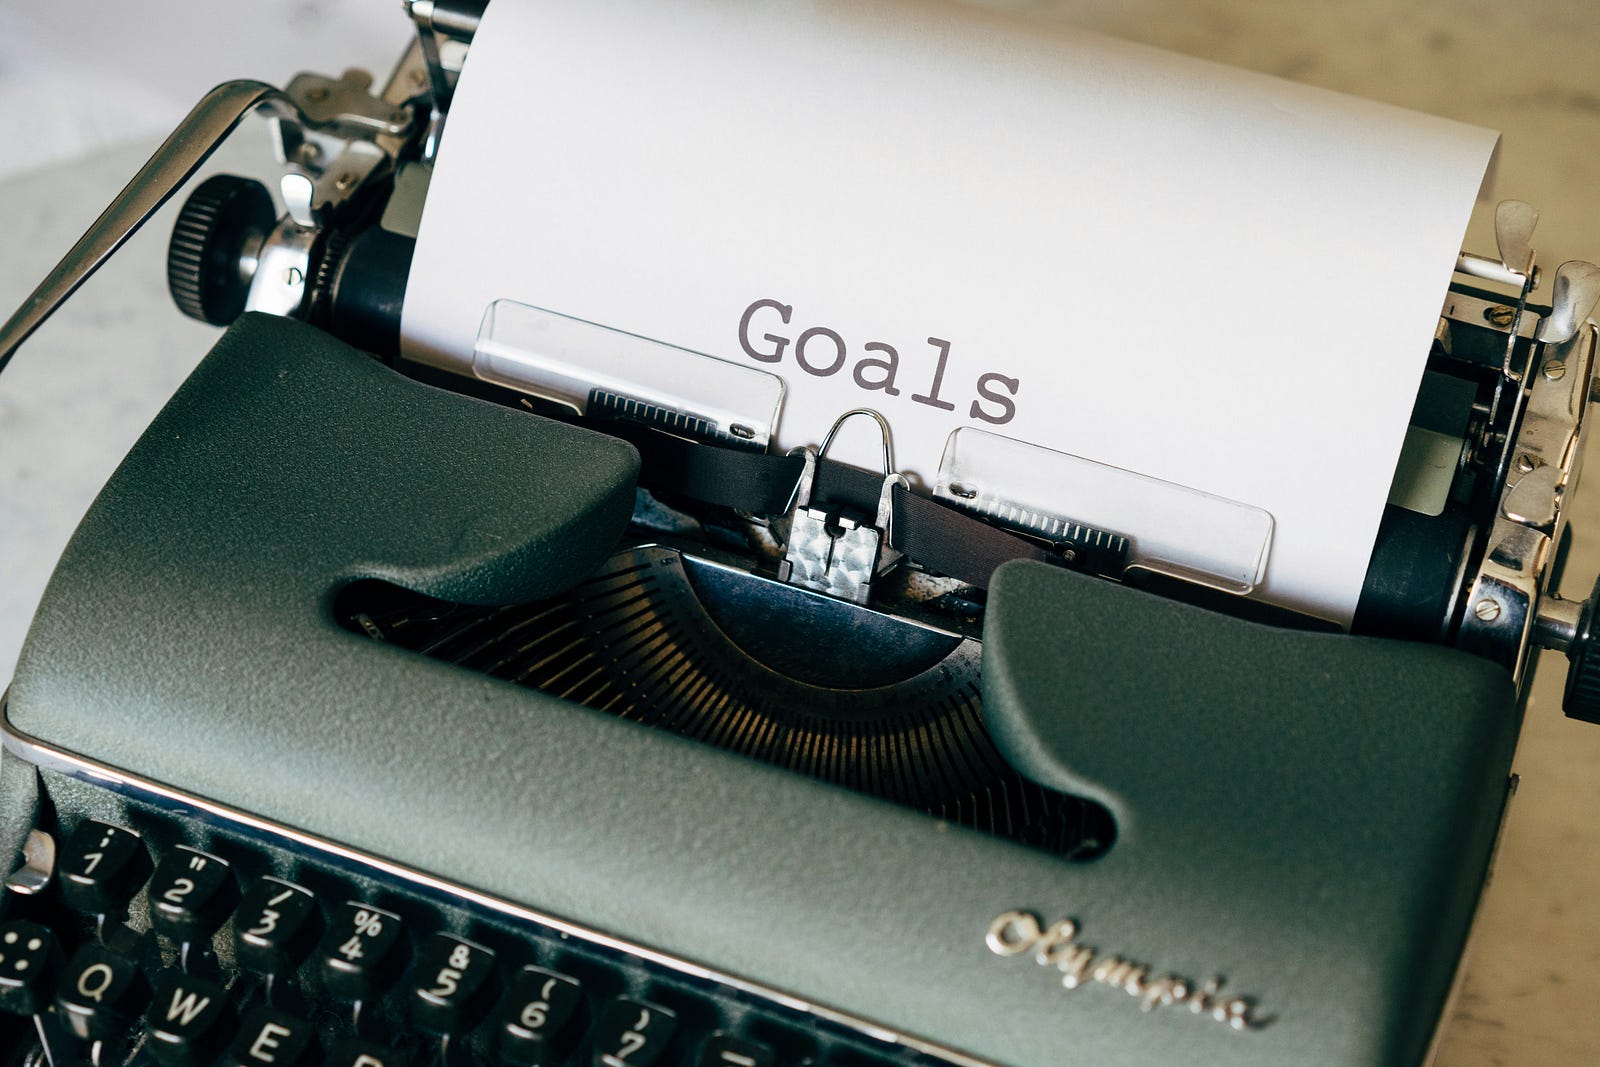 An old-fashioned typewriter has paper coming out, with the word “Goals” typed out.